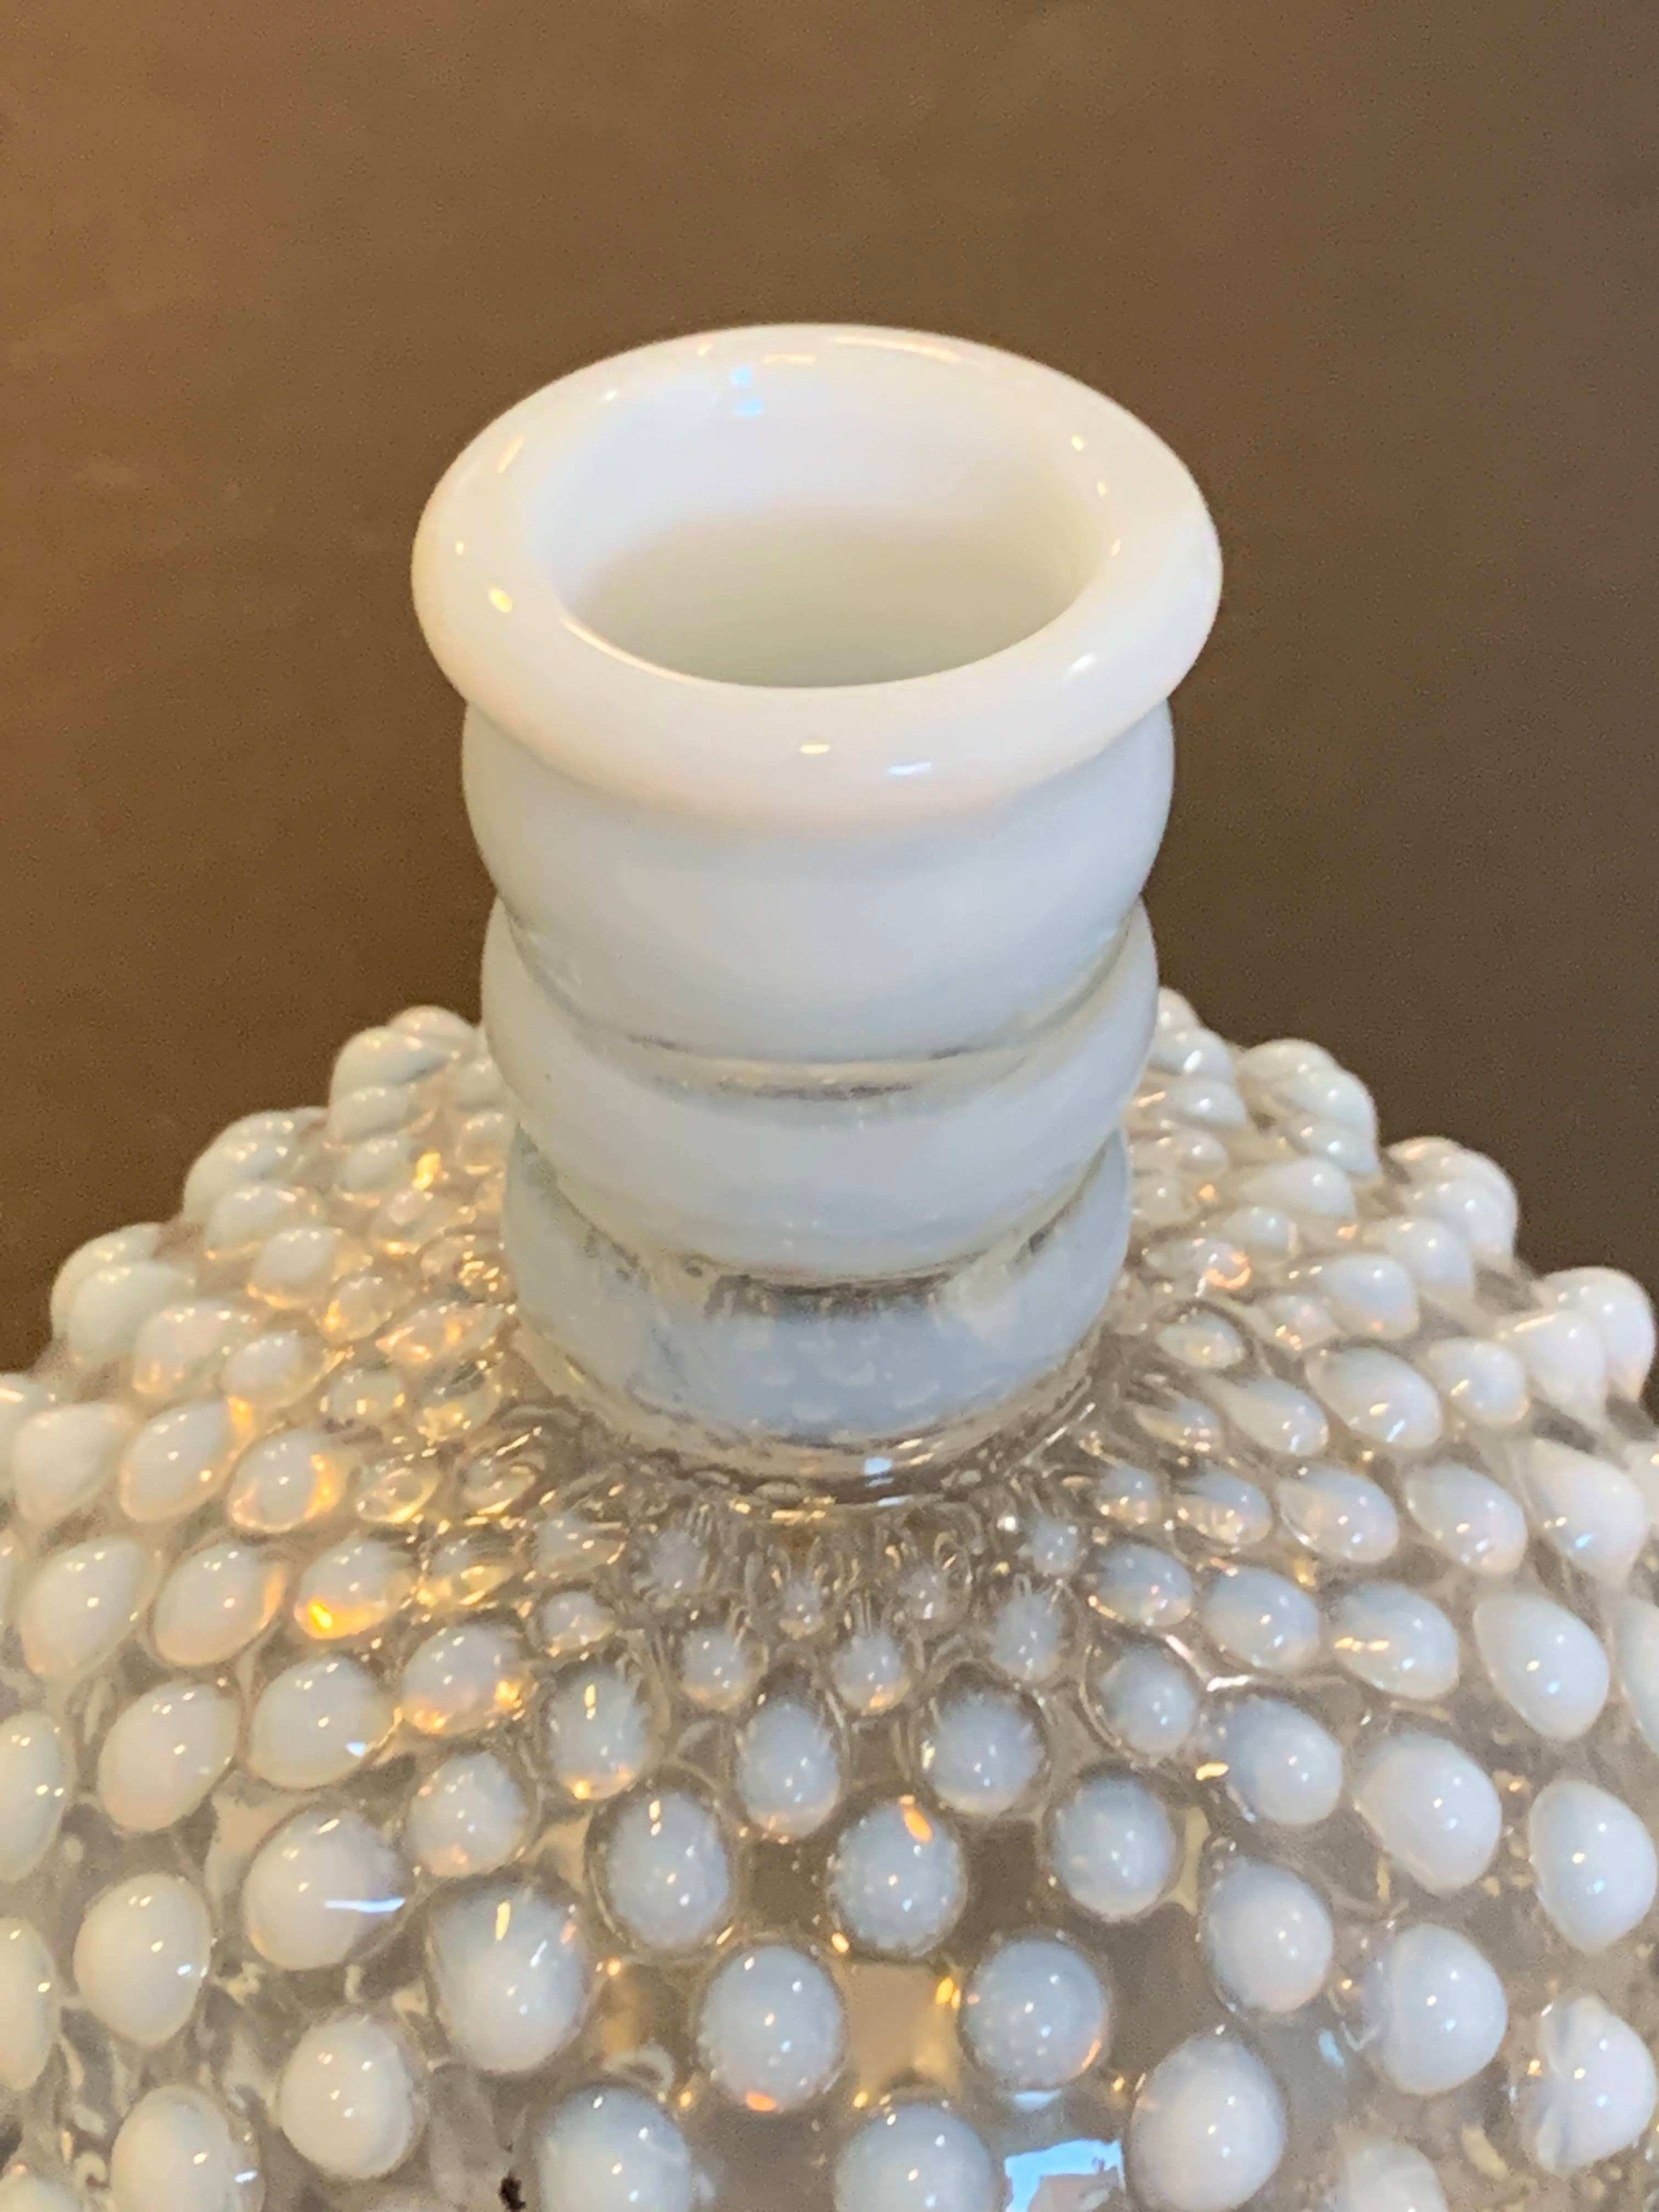 Opaque Milk Glass and Porcelain - Collectible - Vase